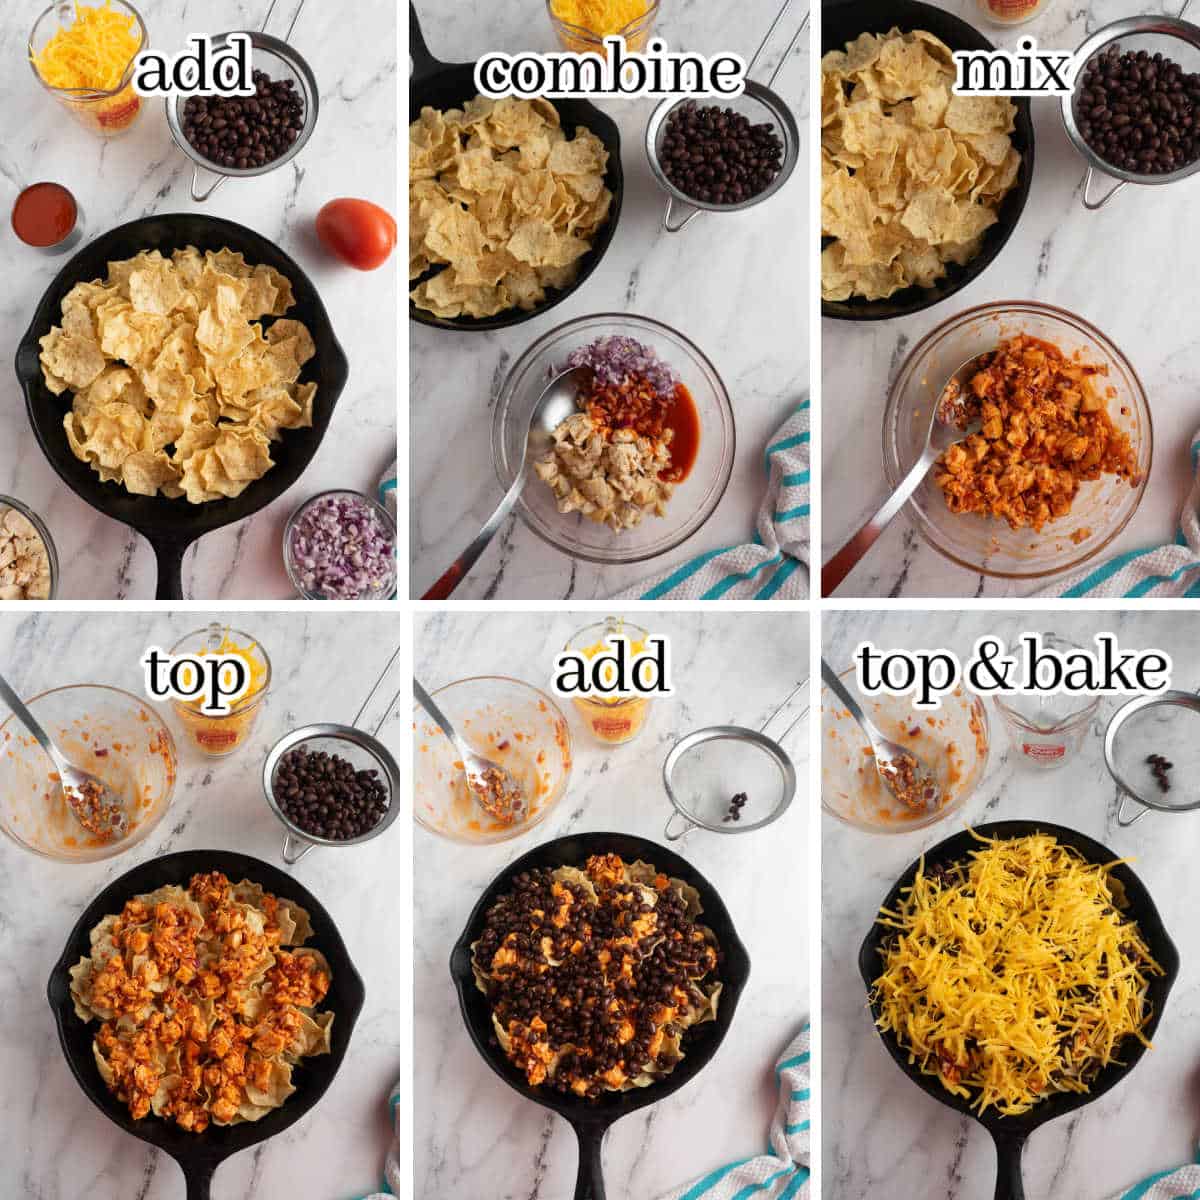 Step-by-step instructions to make the appetizer recipe. With print overlay for clarification.